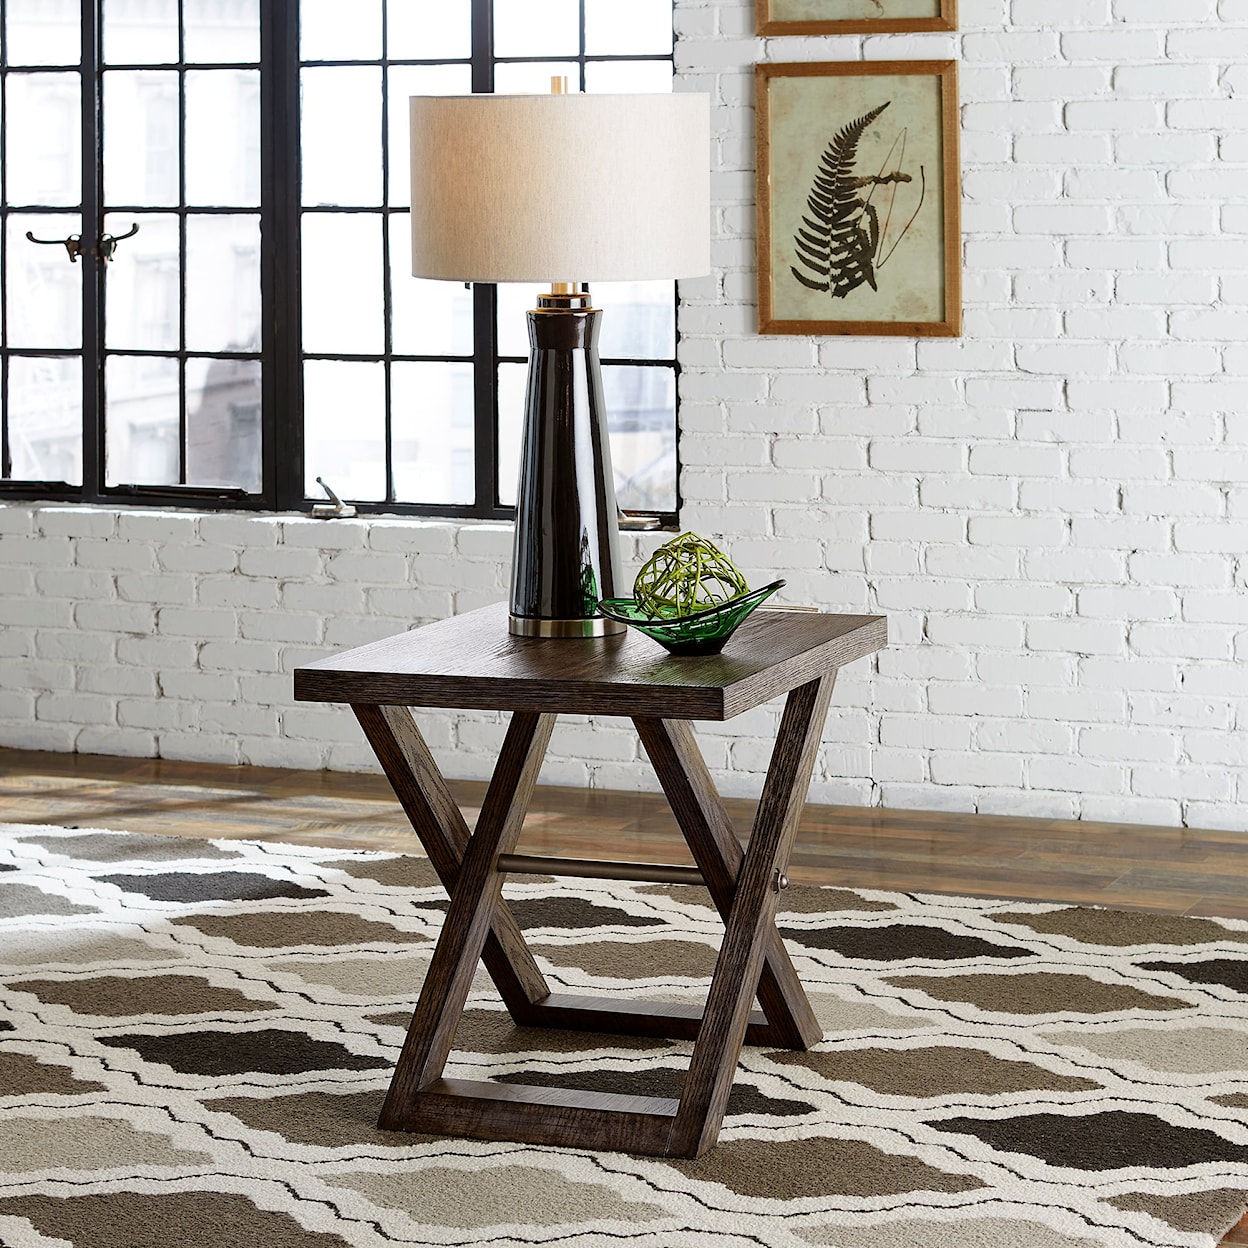 Libby Crossroads End Table